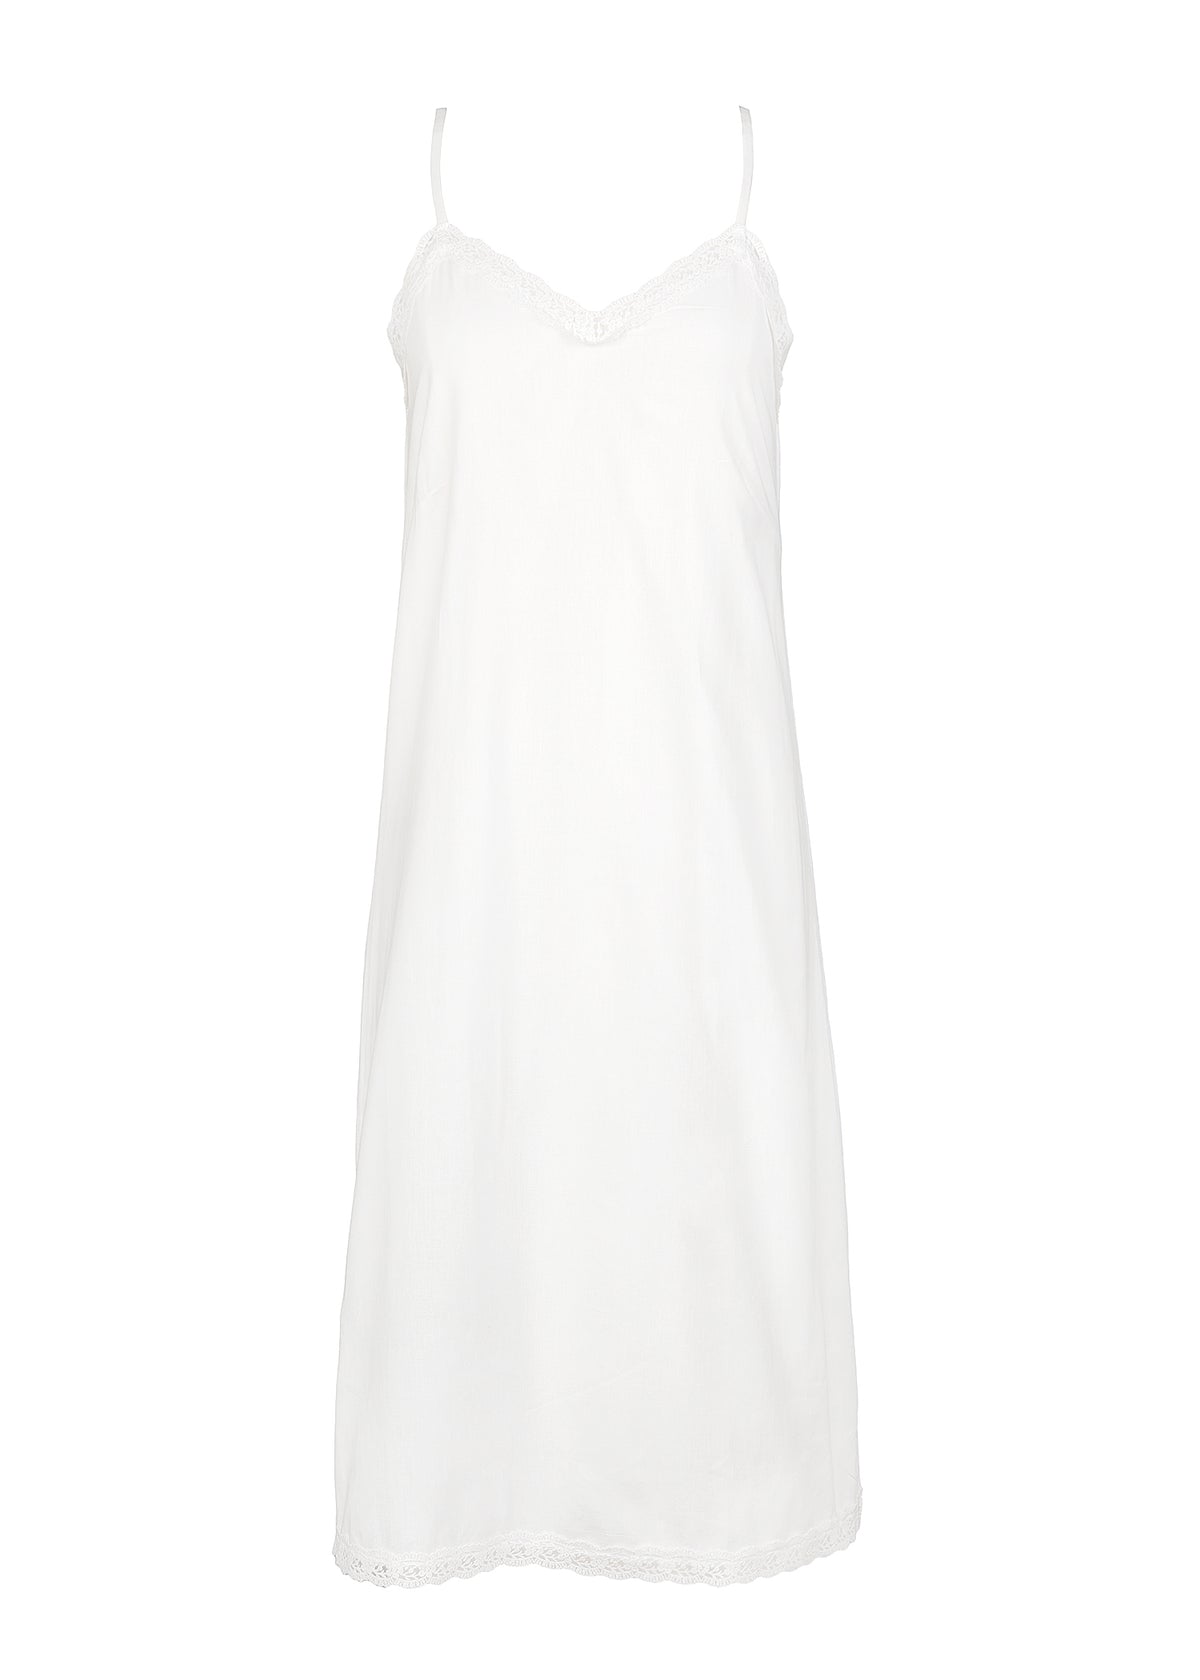 Juliette White Cotton Nightgown, Strapless with Lace